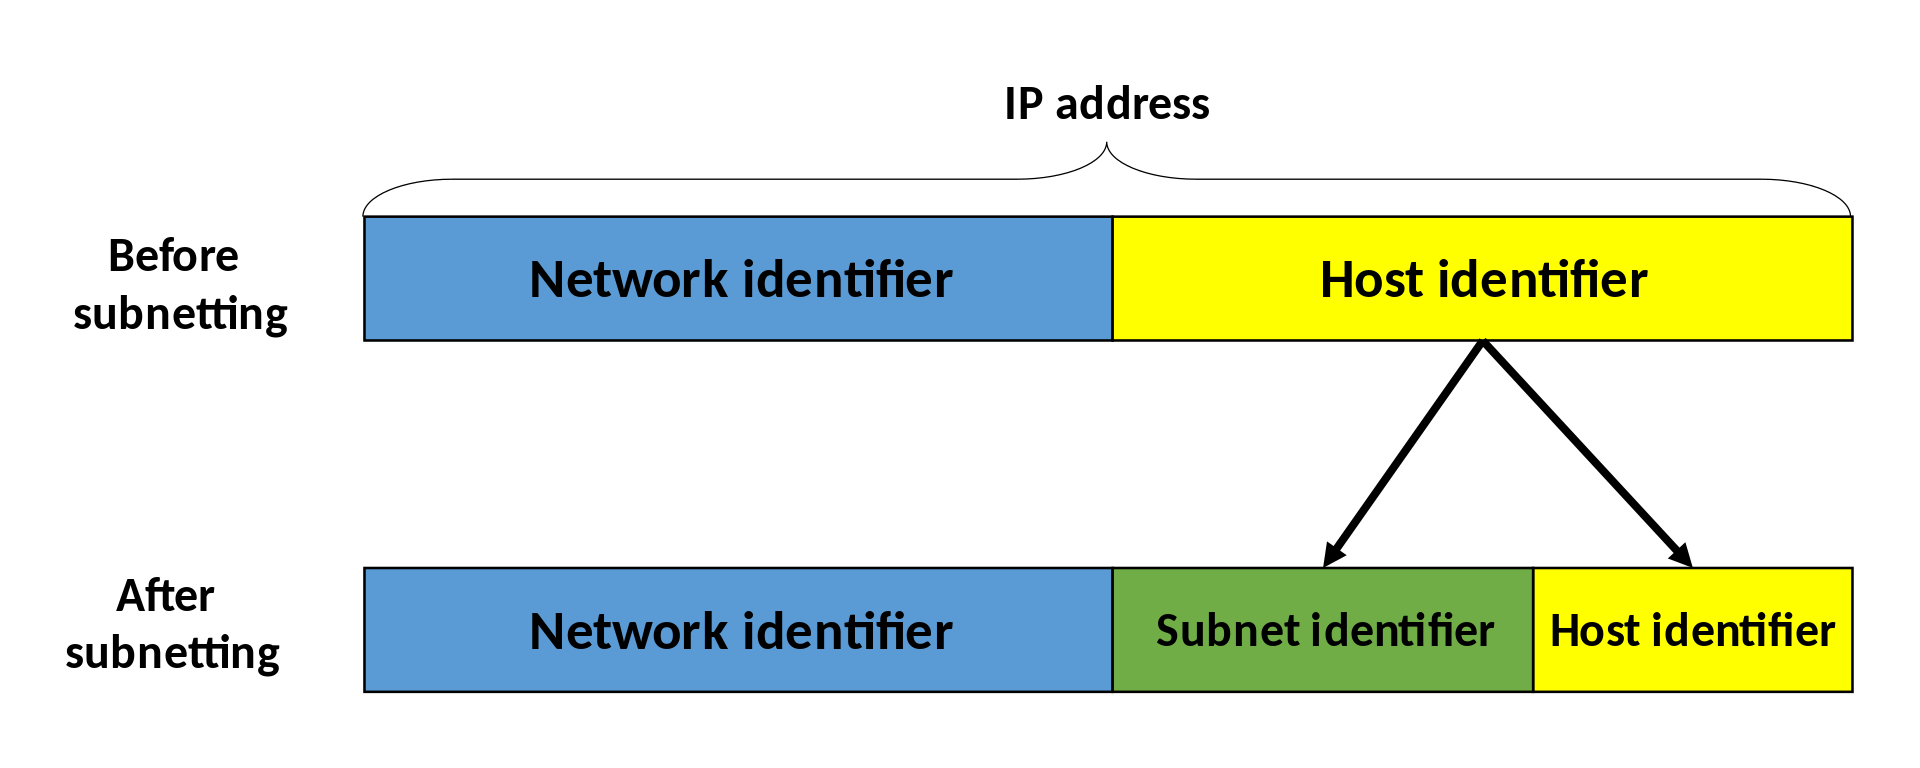 IP Address Structure After Division